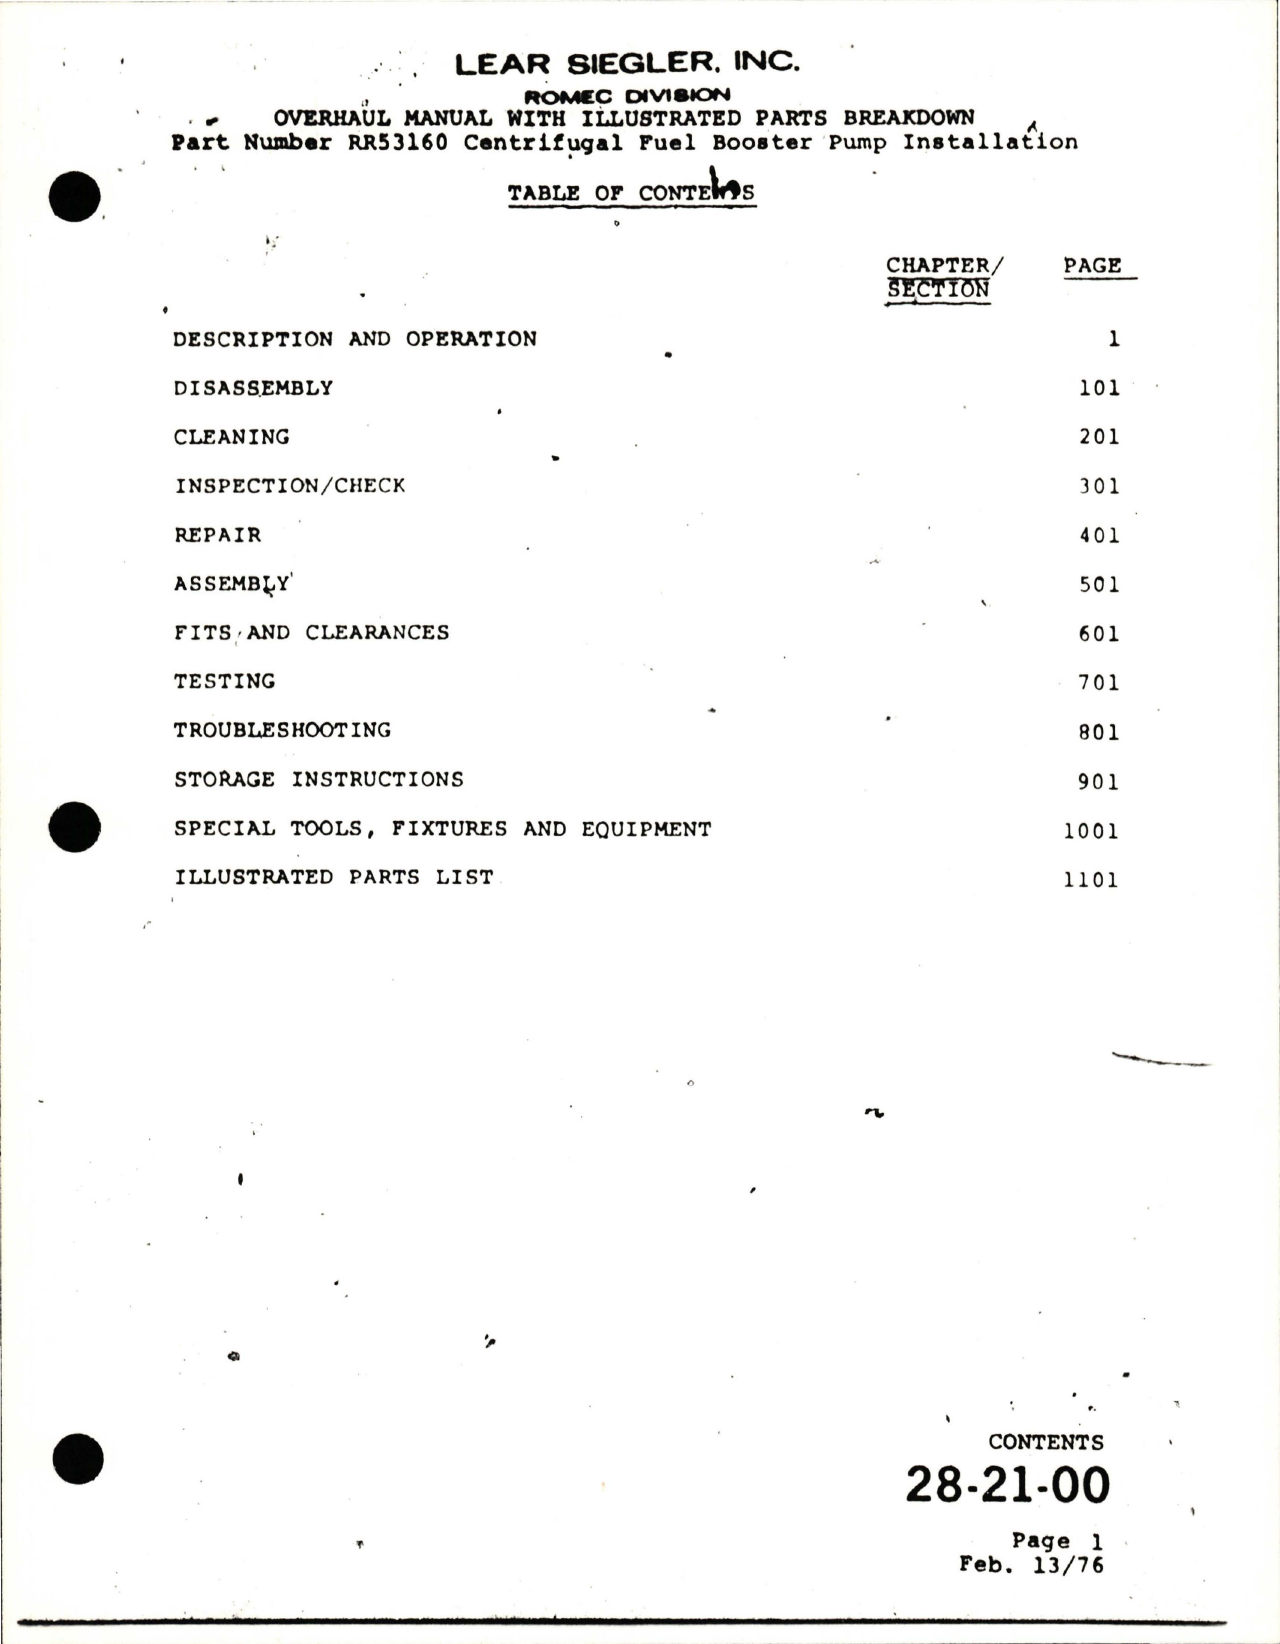 Sample page 5 from AirCorps Library document: Maintenance Manual for Centrifugal Fuel Booster Pump Installation - Series RR53160 